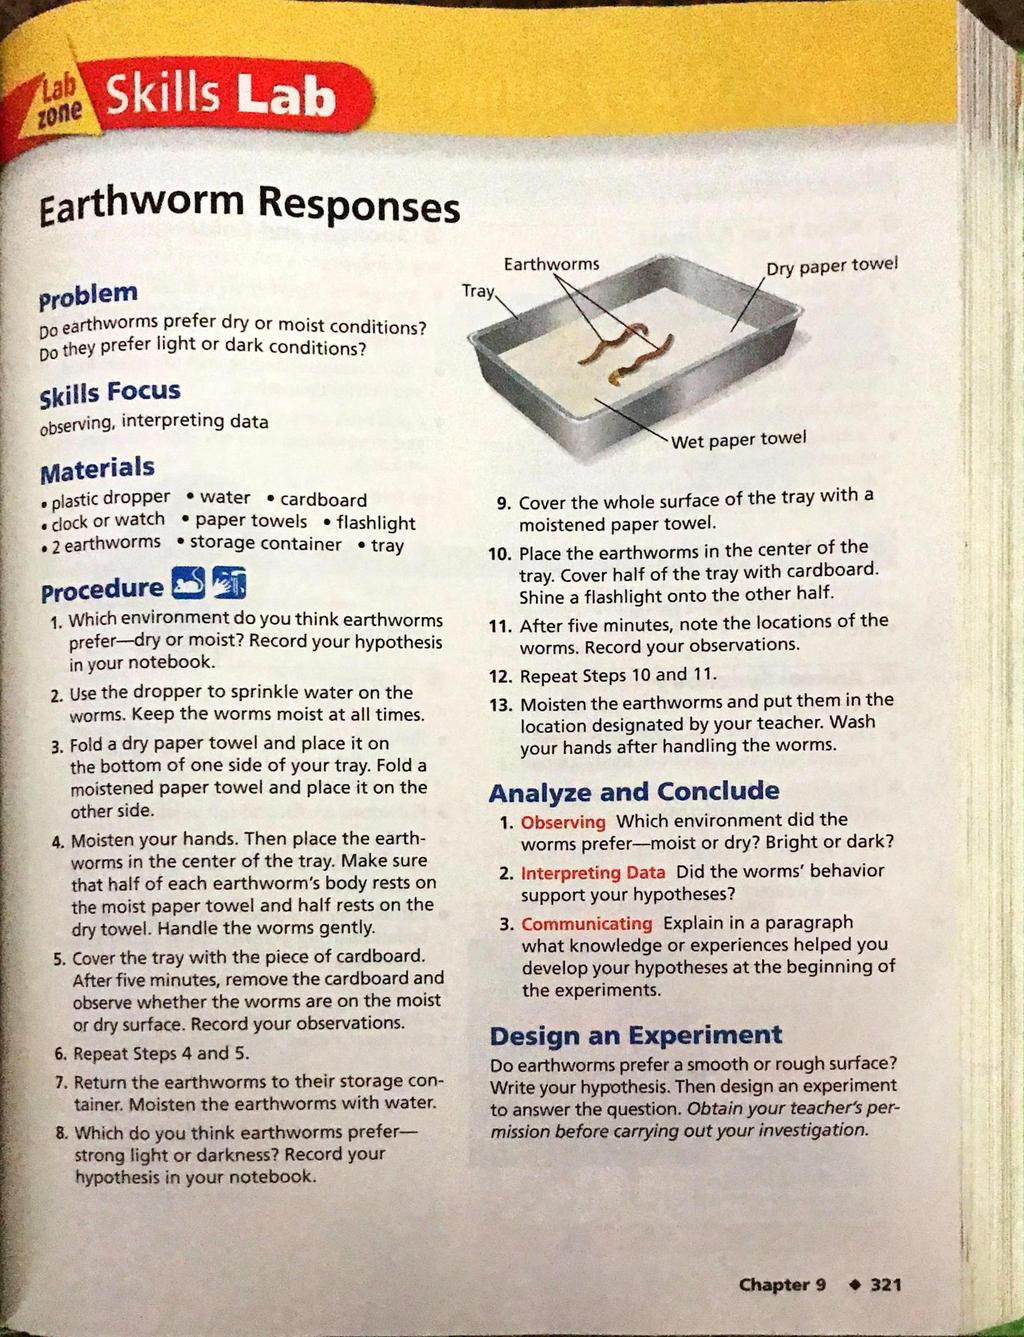 zone Earthworm Responses Problem Do earthworms prefer dry or moist conditions? DO they prefer light or dark conditions?